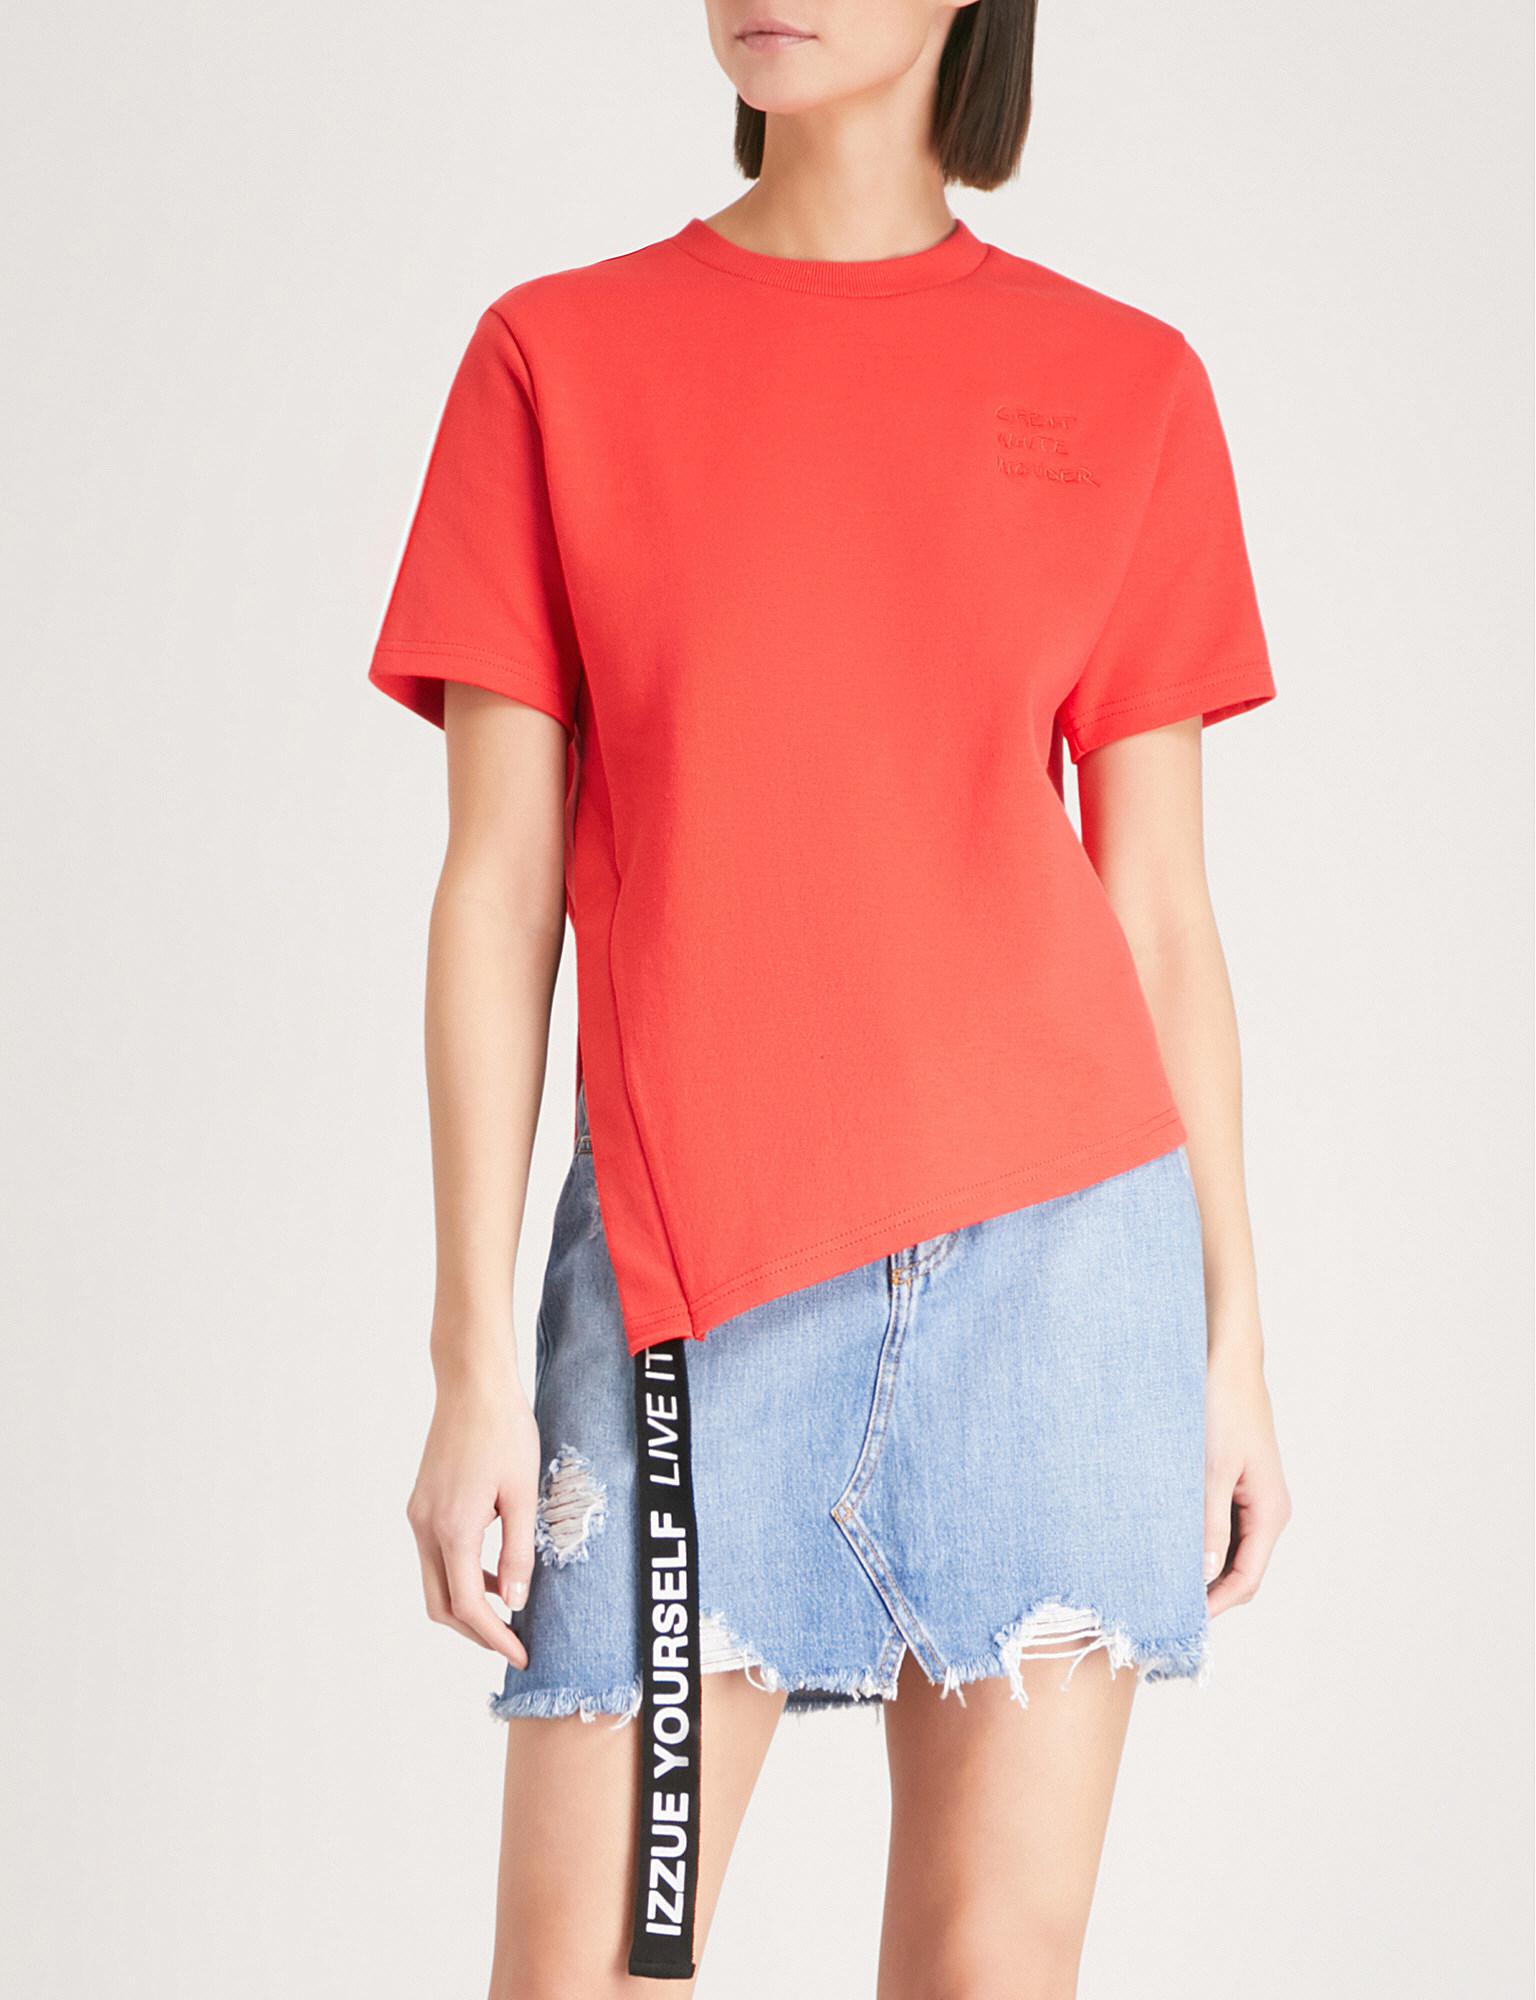 Izzue Slit And Tape Cotton-jersey T-shirt in Red - Lyst